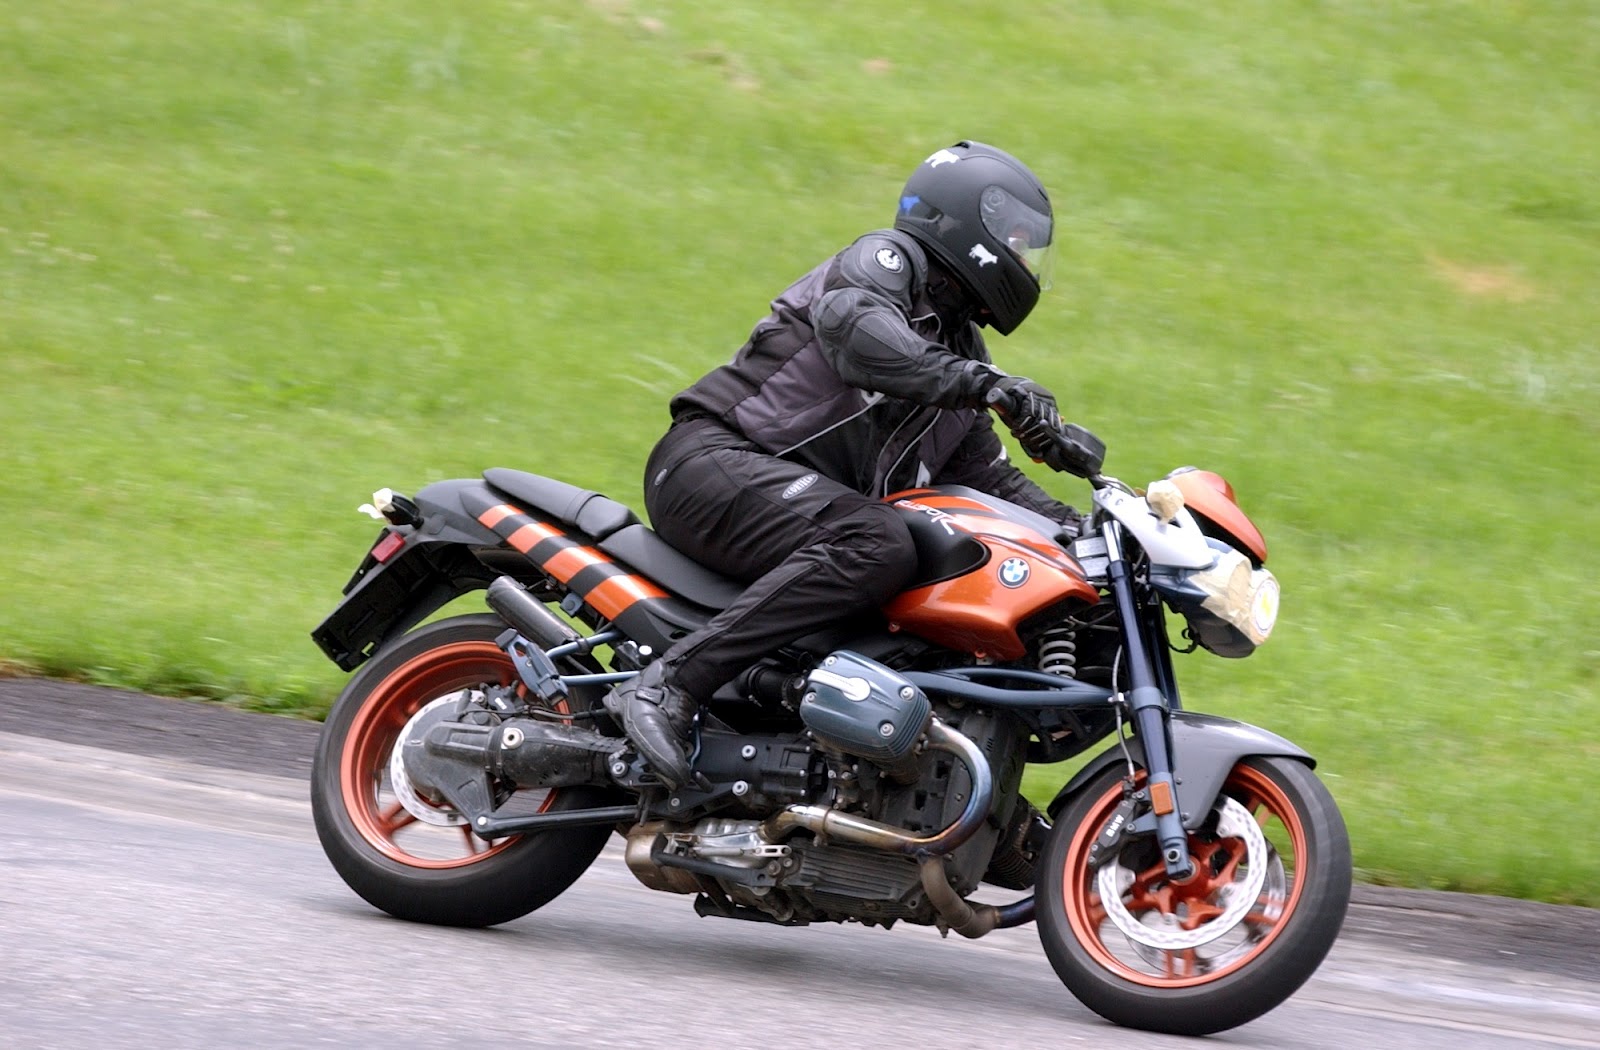 BMW Motorcycles of Grand Rapids - A Review: Great Bikes: Poor Service